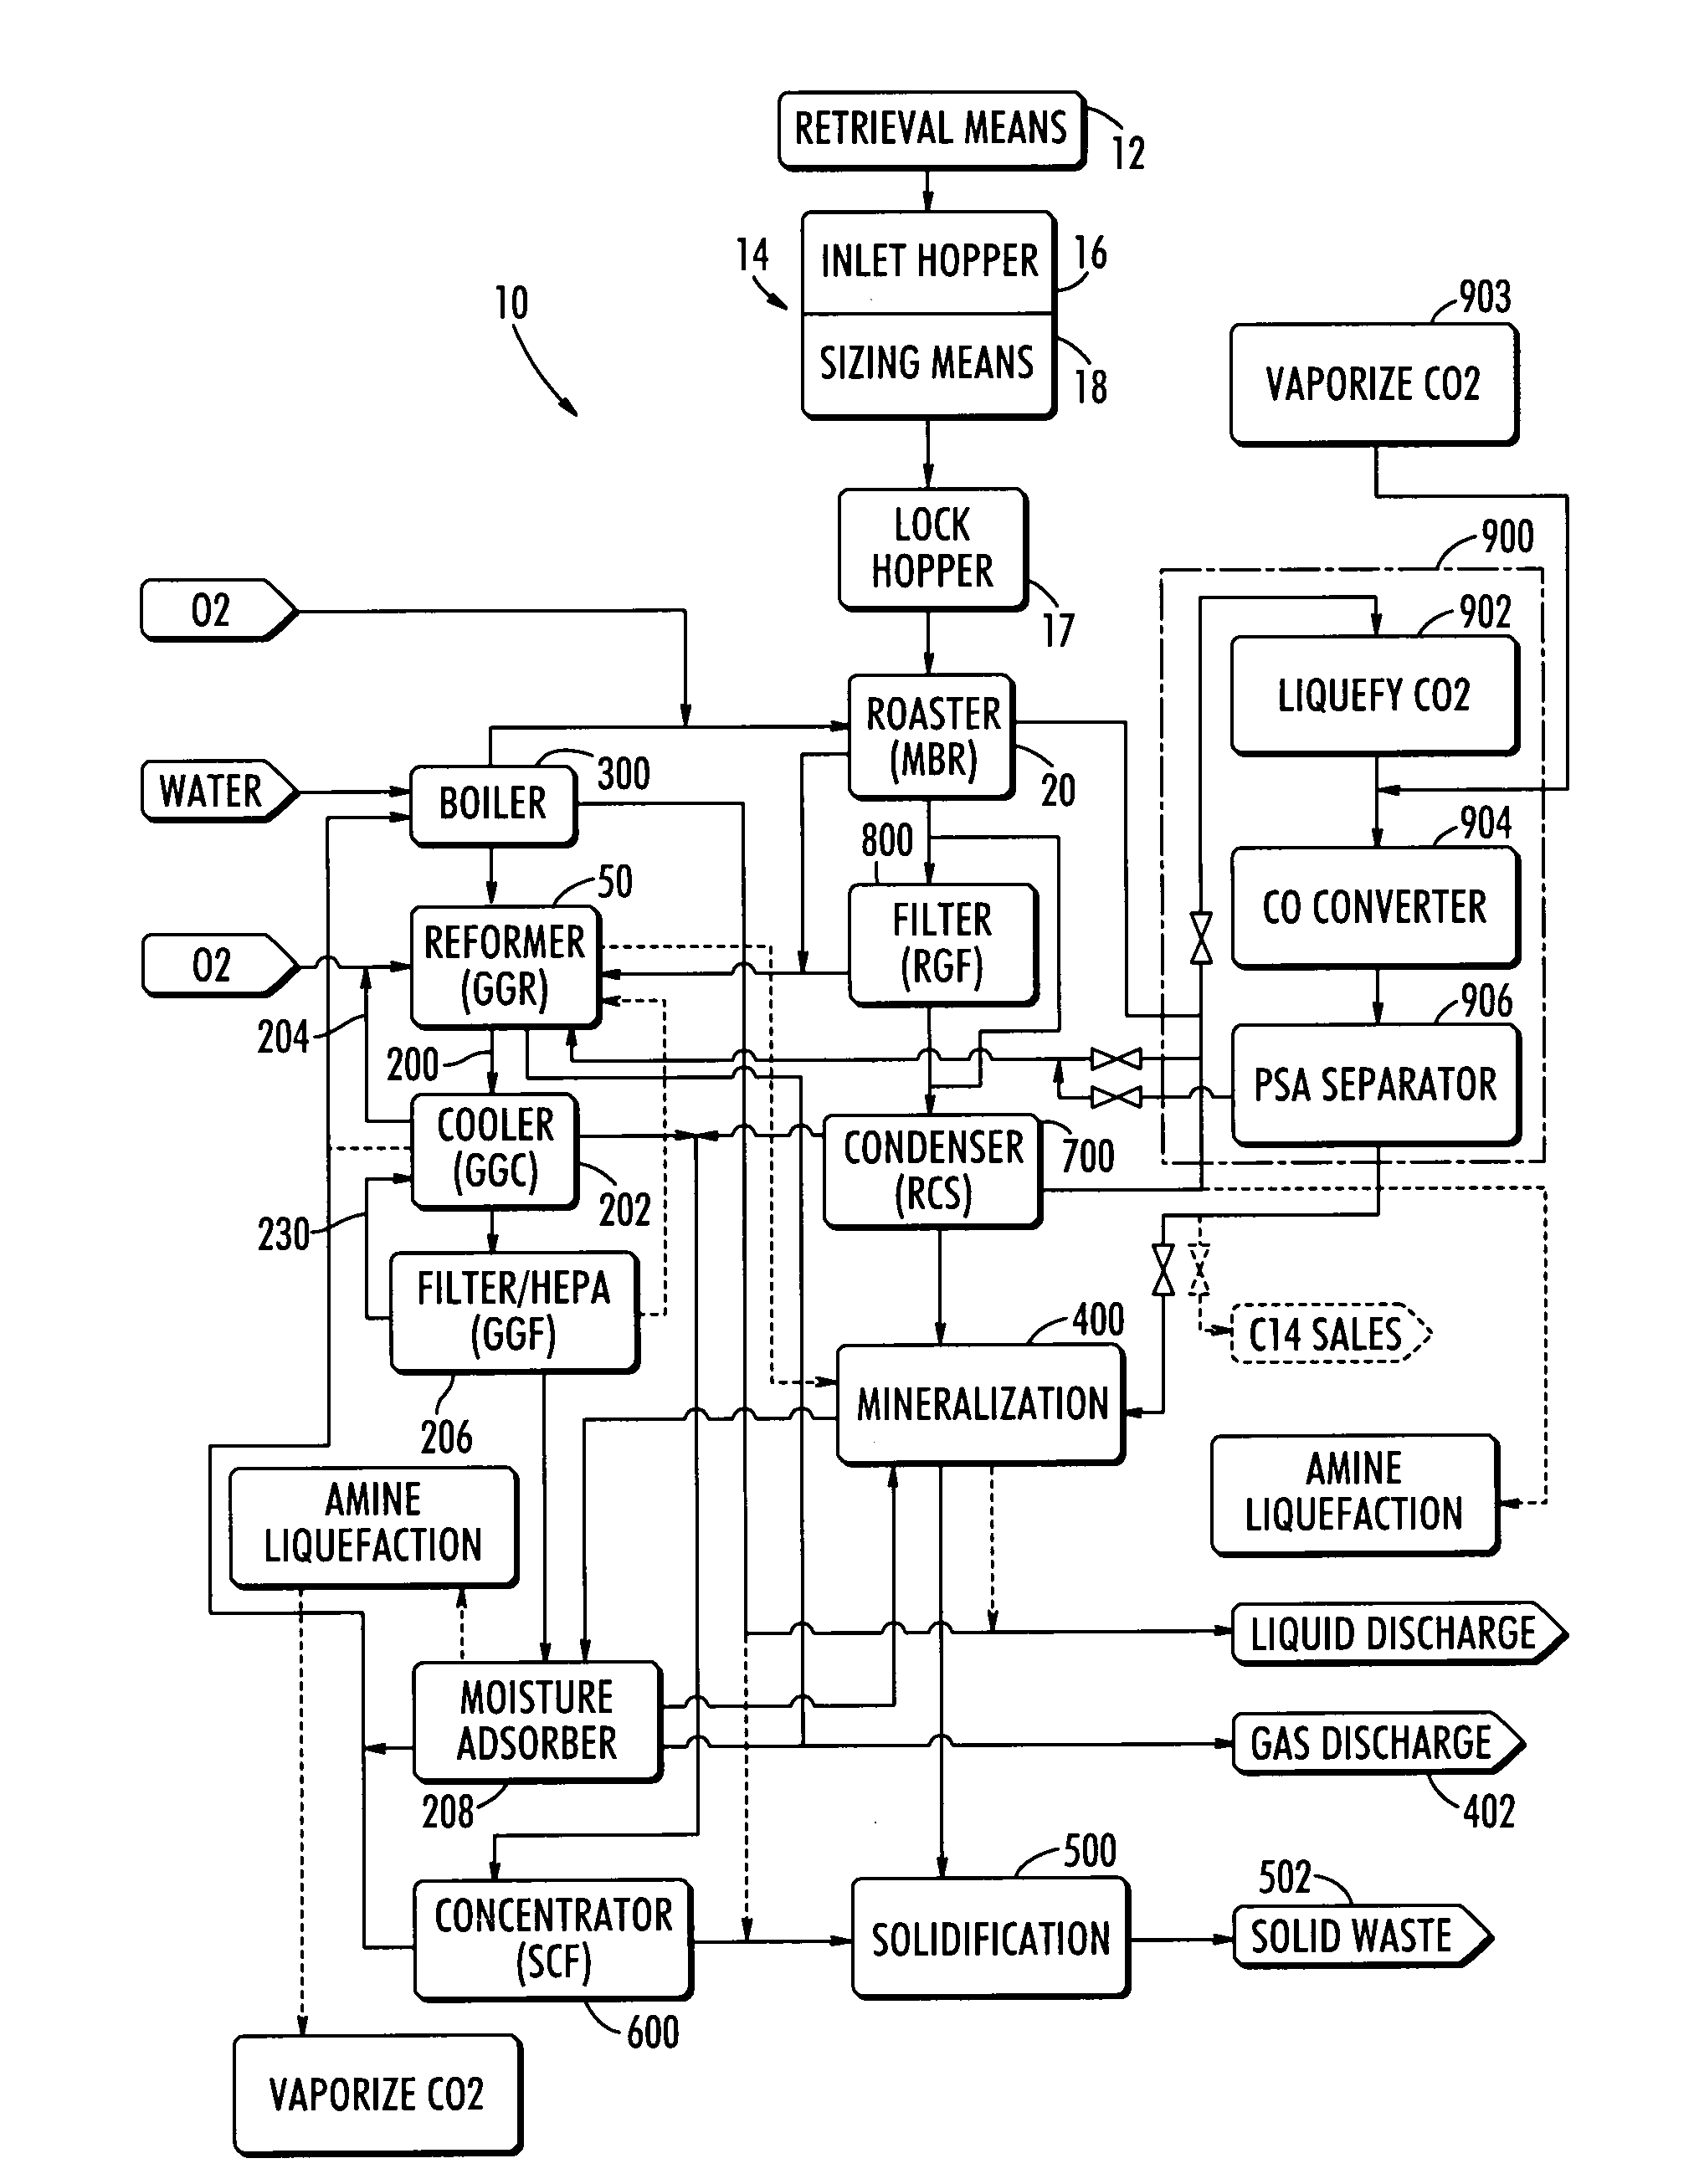 Steam reforming process system for graphite destruction and capture of radionuclides